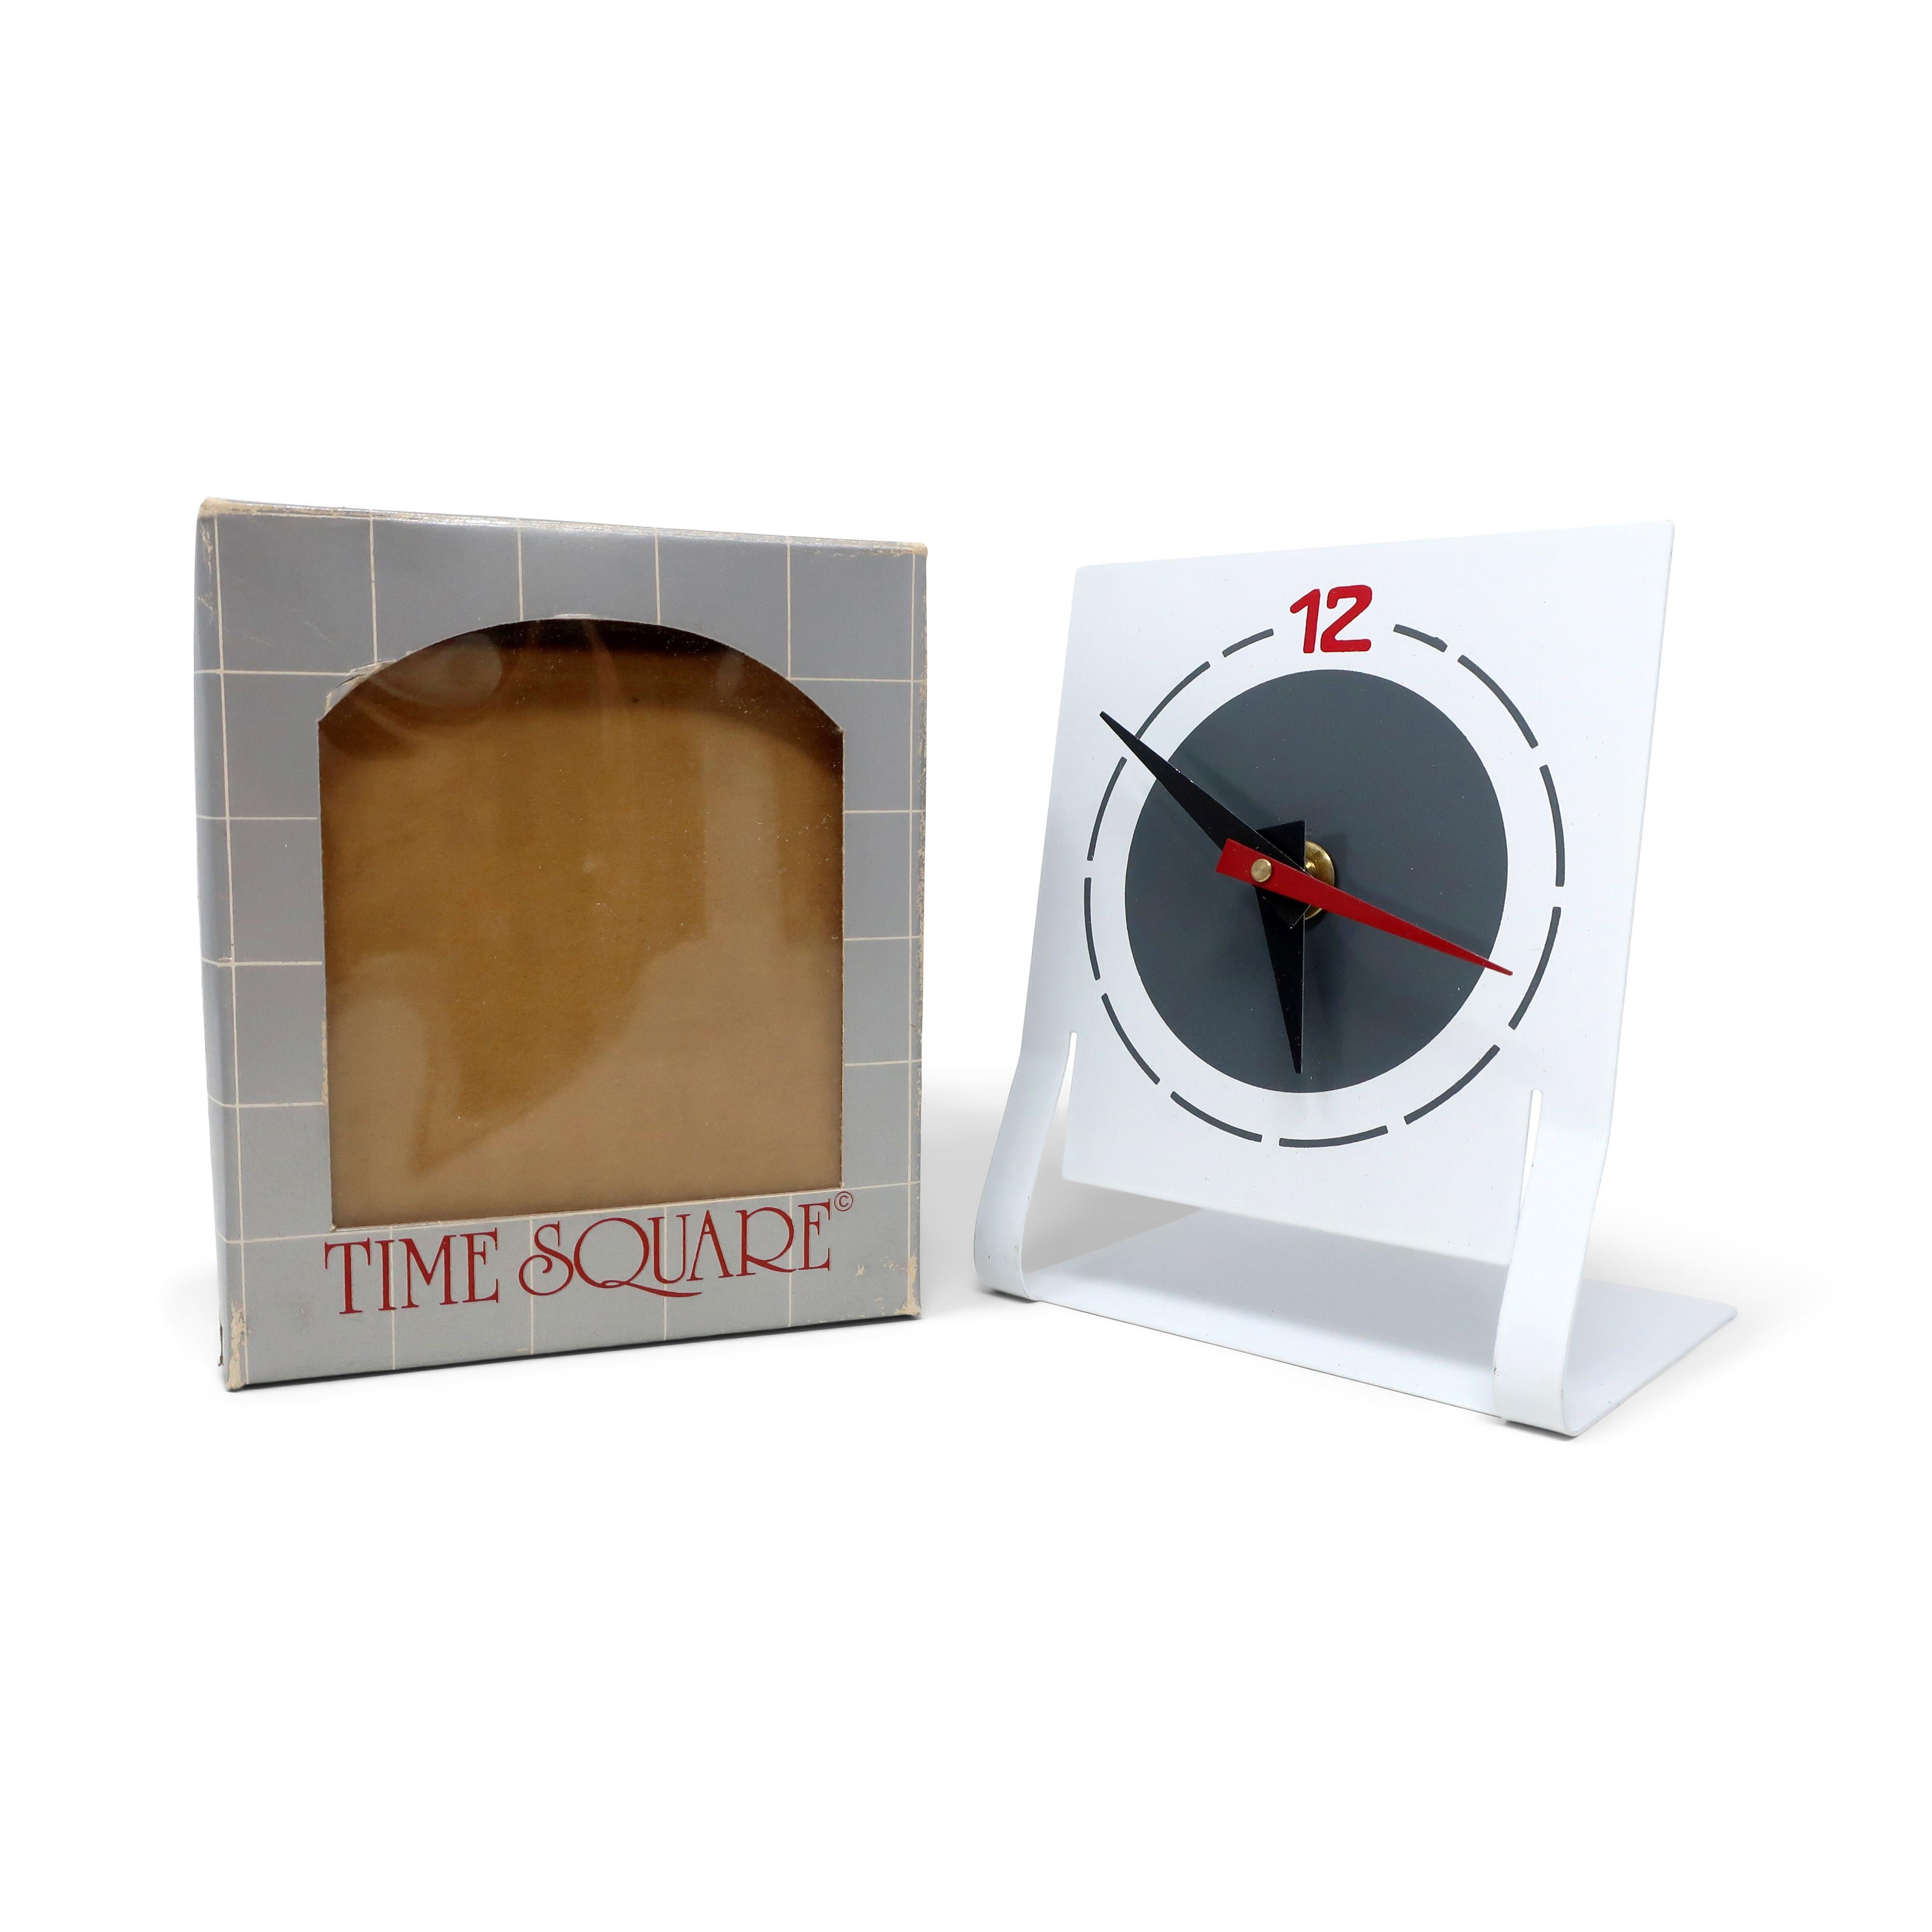 Post-Modern 1980s White Metal Desk Clock by Time Square For Sale